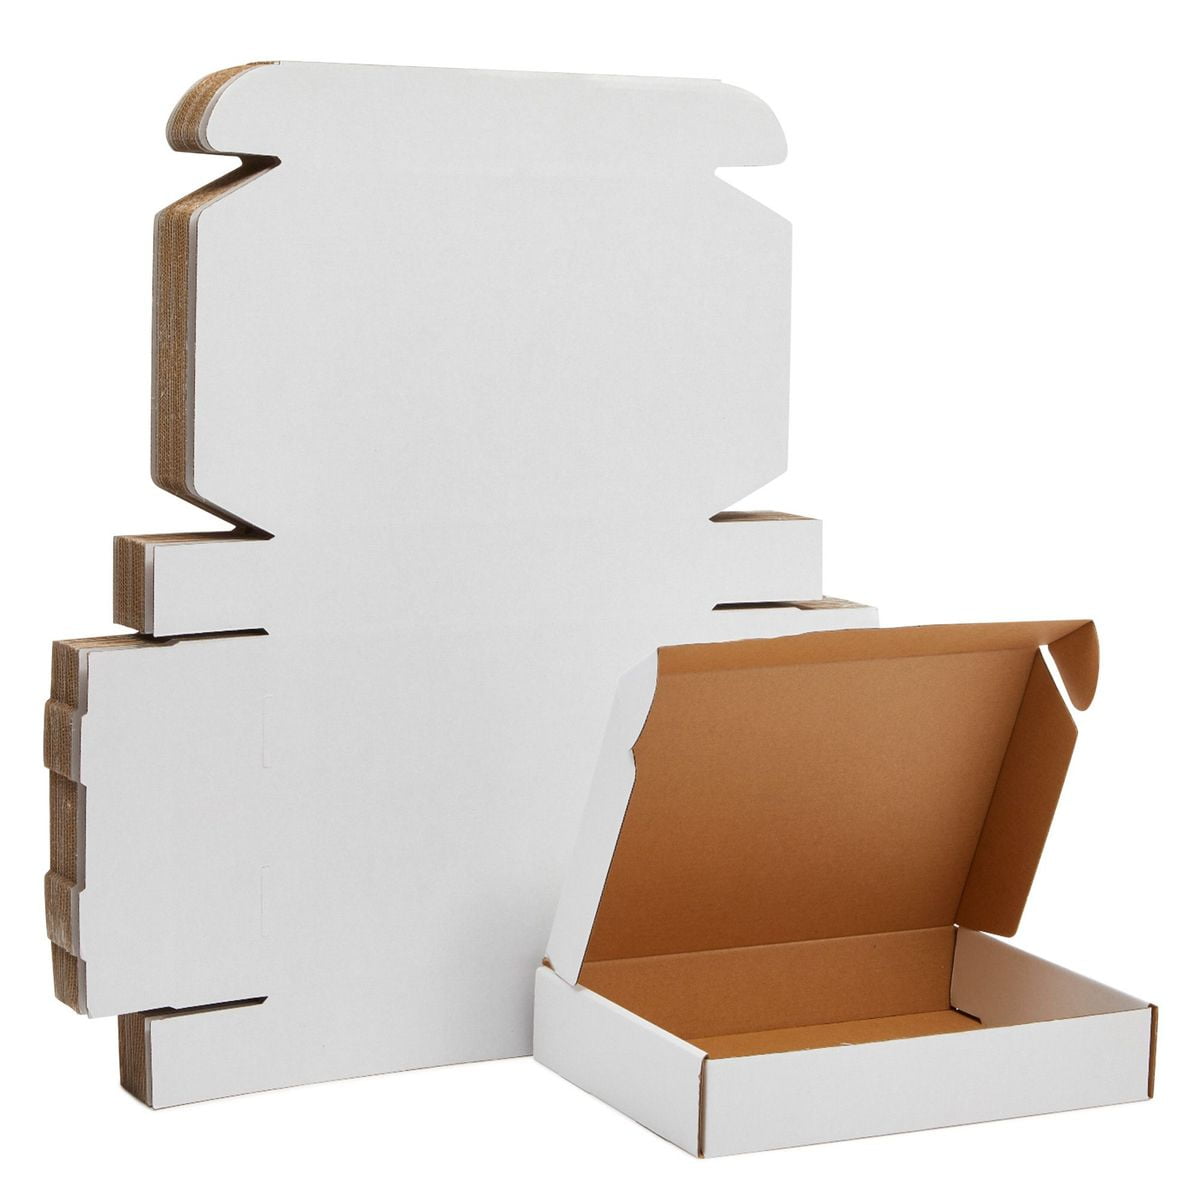 A4 Postal Packaging Cardboard Boxes 12 x 9 x 4" Single Wall Mailing Cartons 